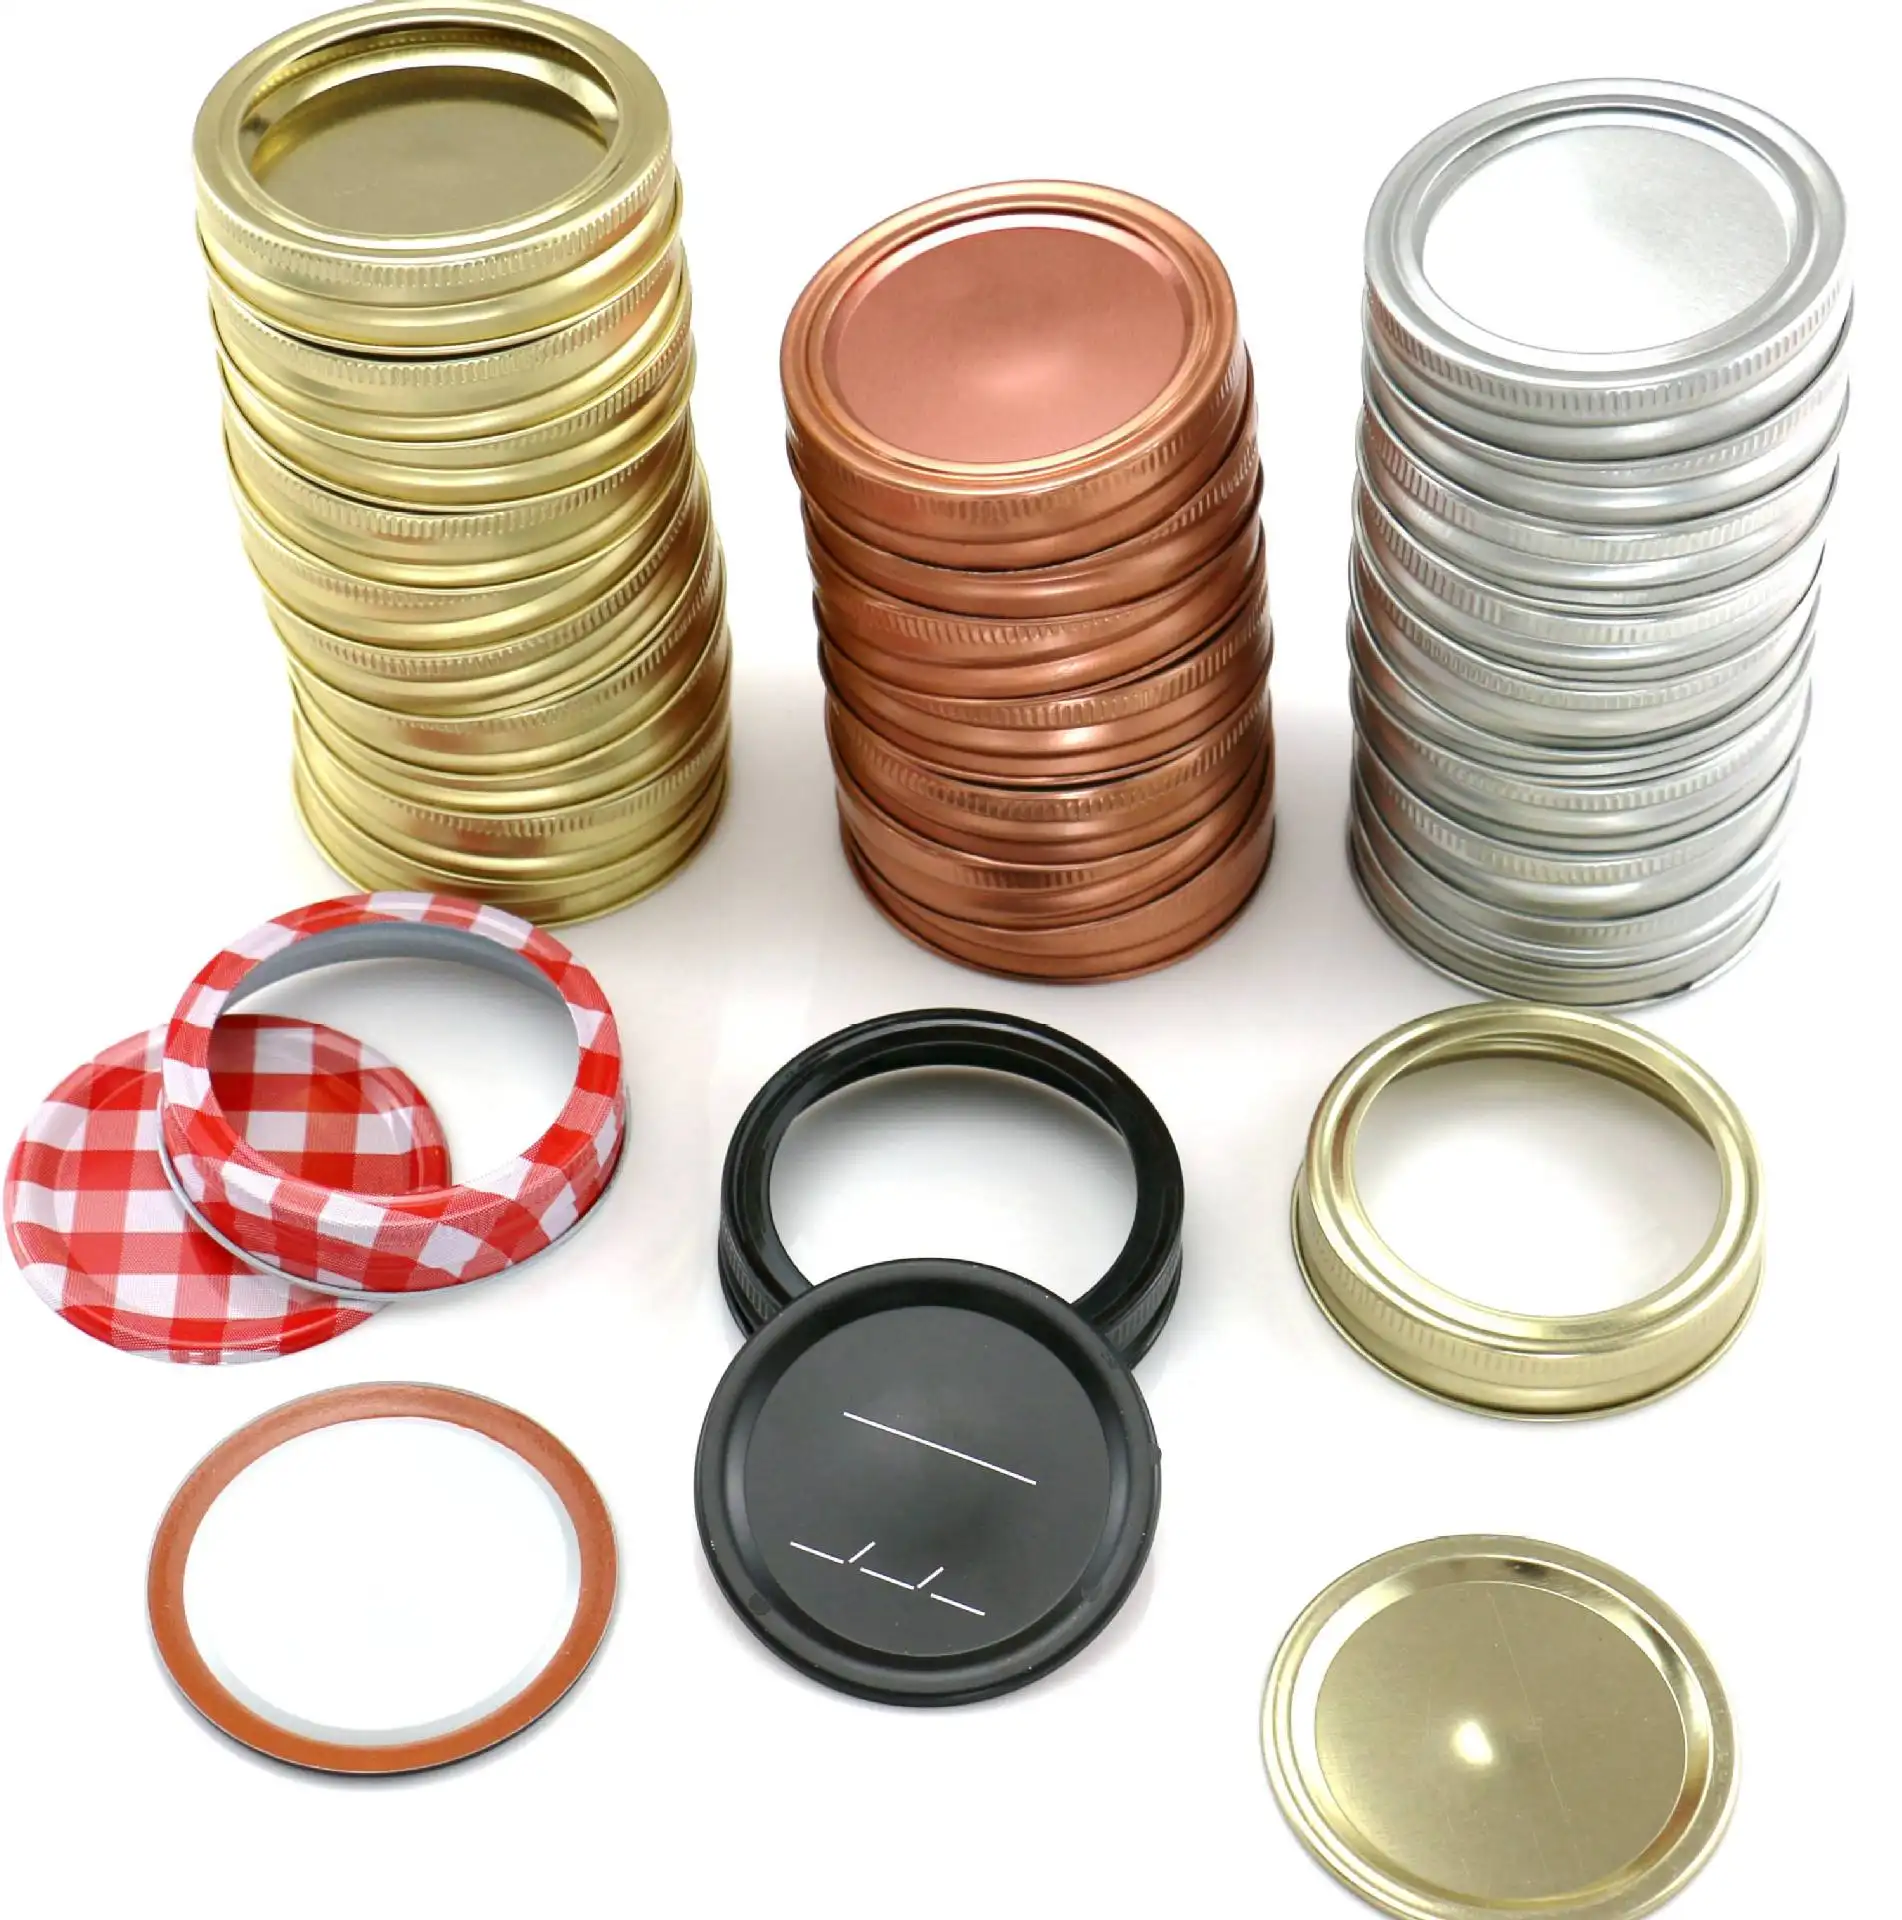 Cheap Price Regular 70mm Gold Canning Lids Wide Mouth 86mm Silver 2 Pieces Plate Band Aluminum Metal Tin Mason Jar Canning Lids